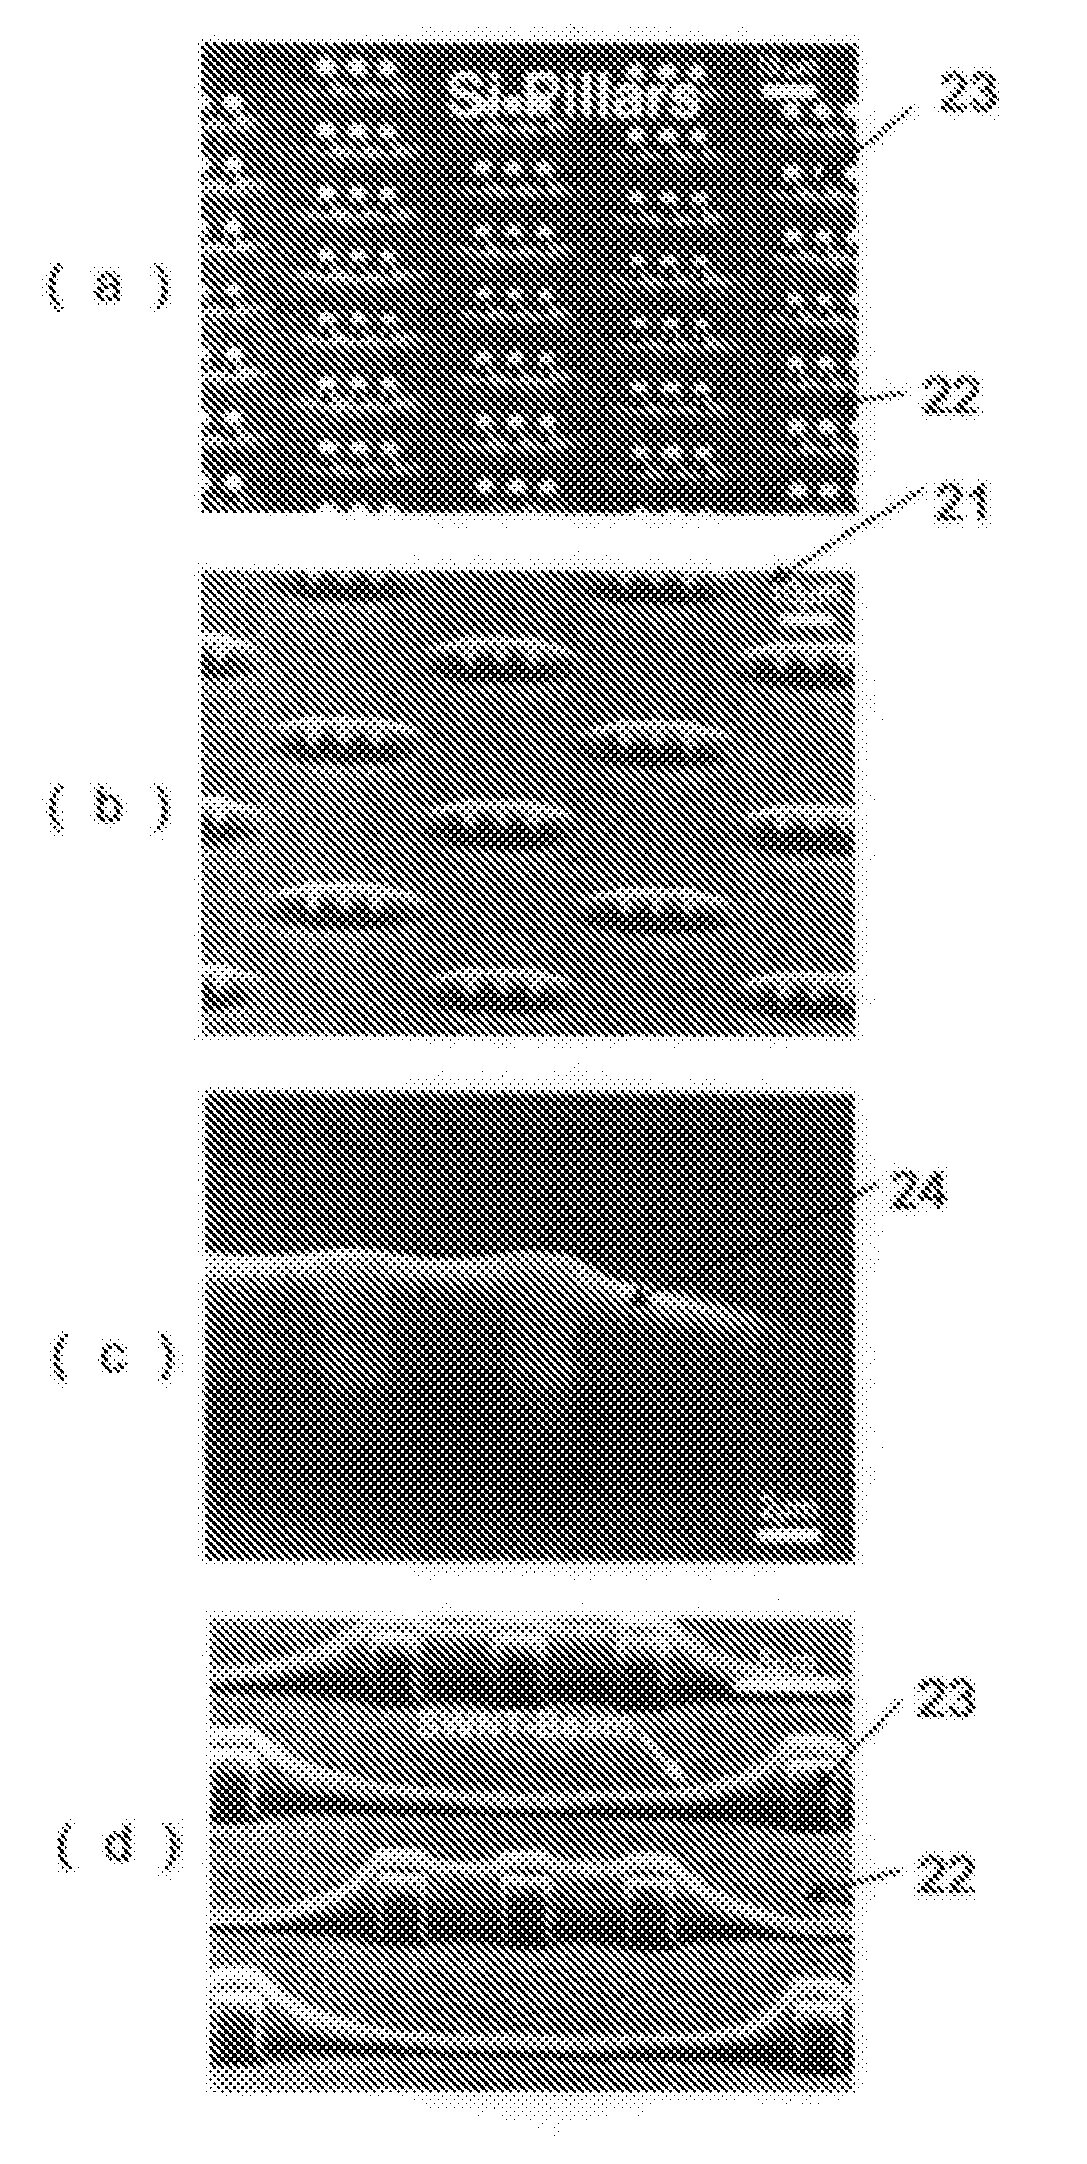 Carbon nanotube film structure and method for manufacturing the same